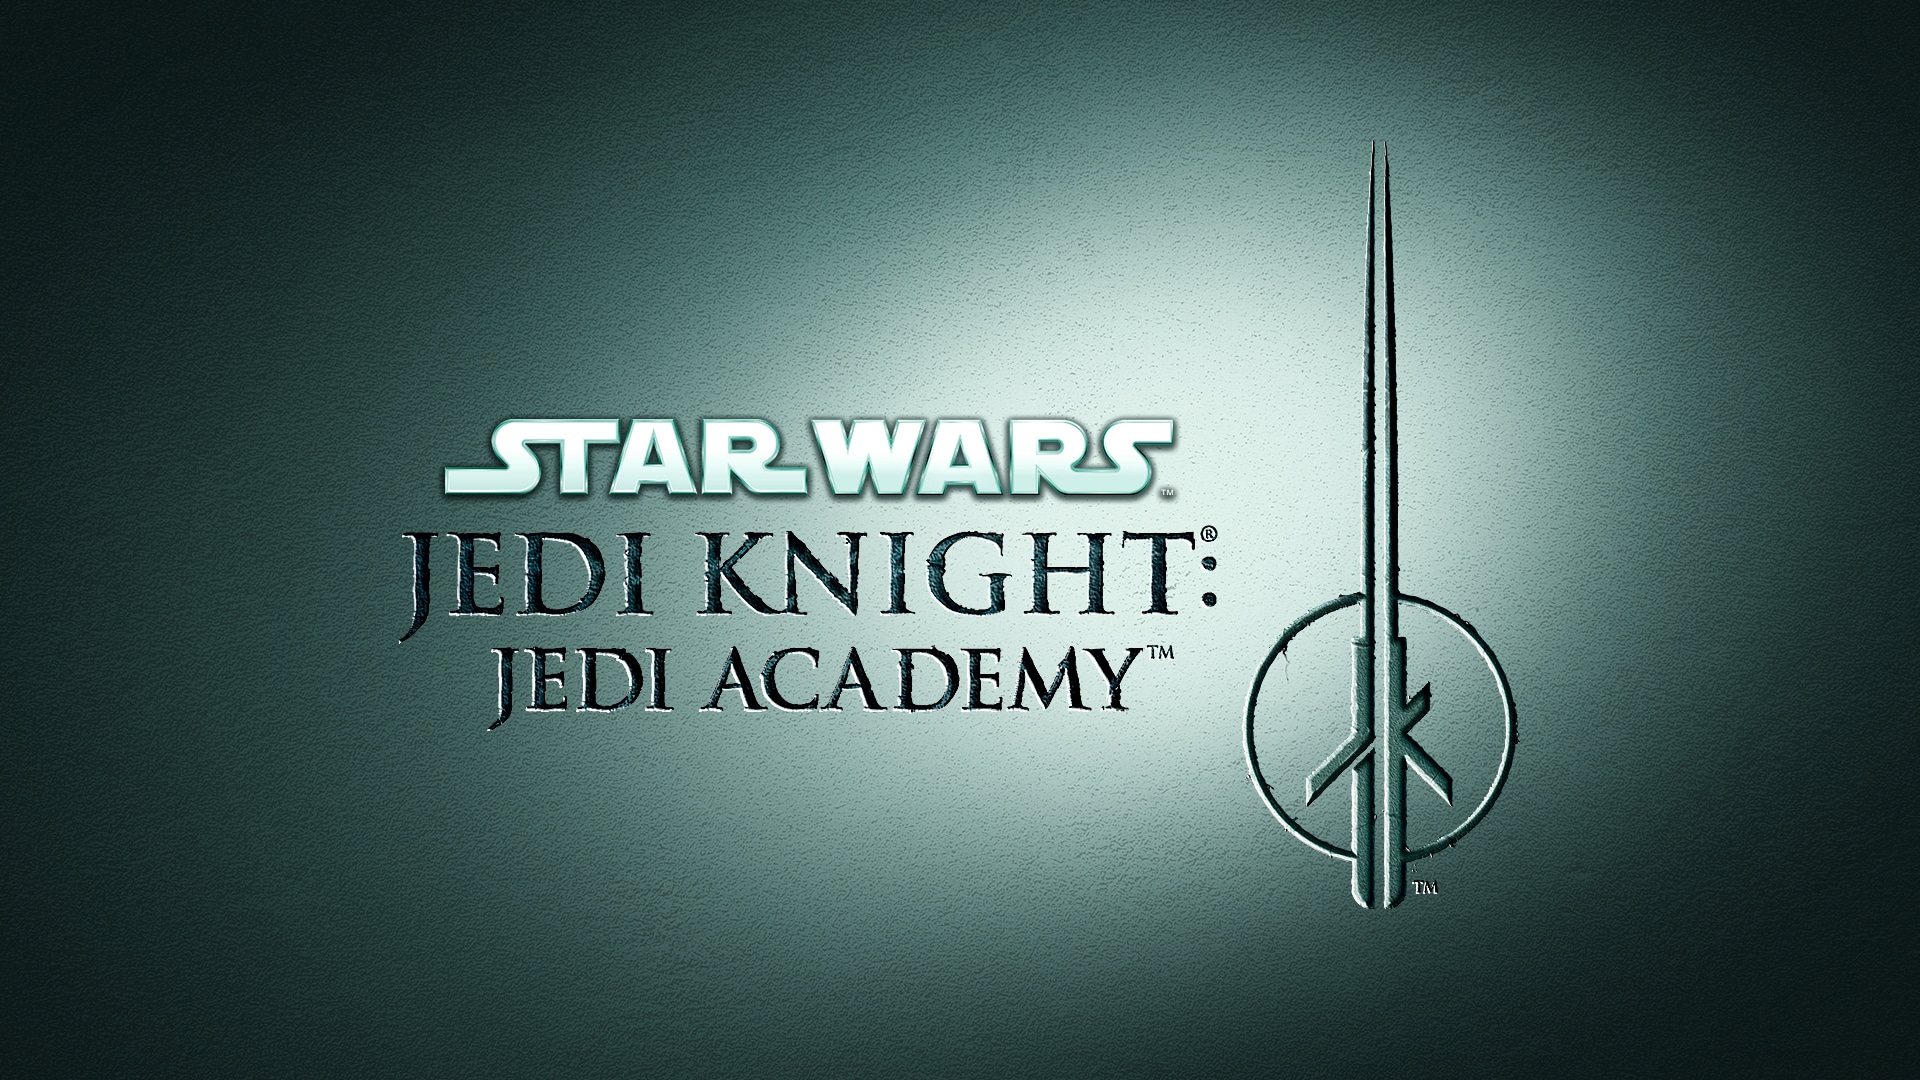 Star Wars Jedi Knight: Jedi Academy Hits Switch and PS4 Nearly 20 Years After Release